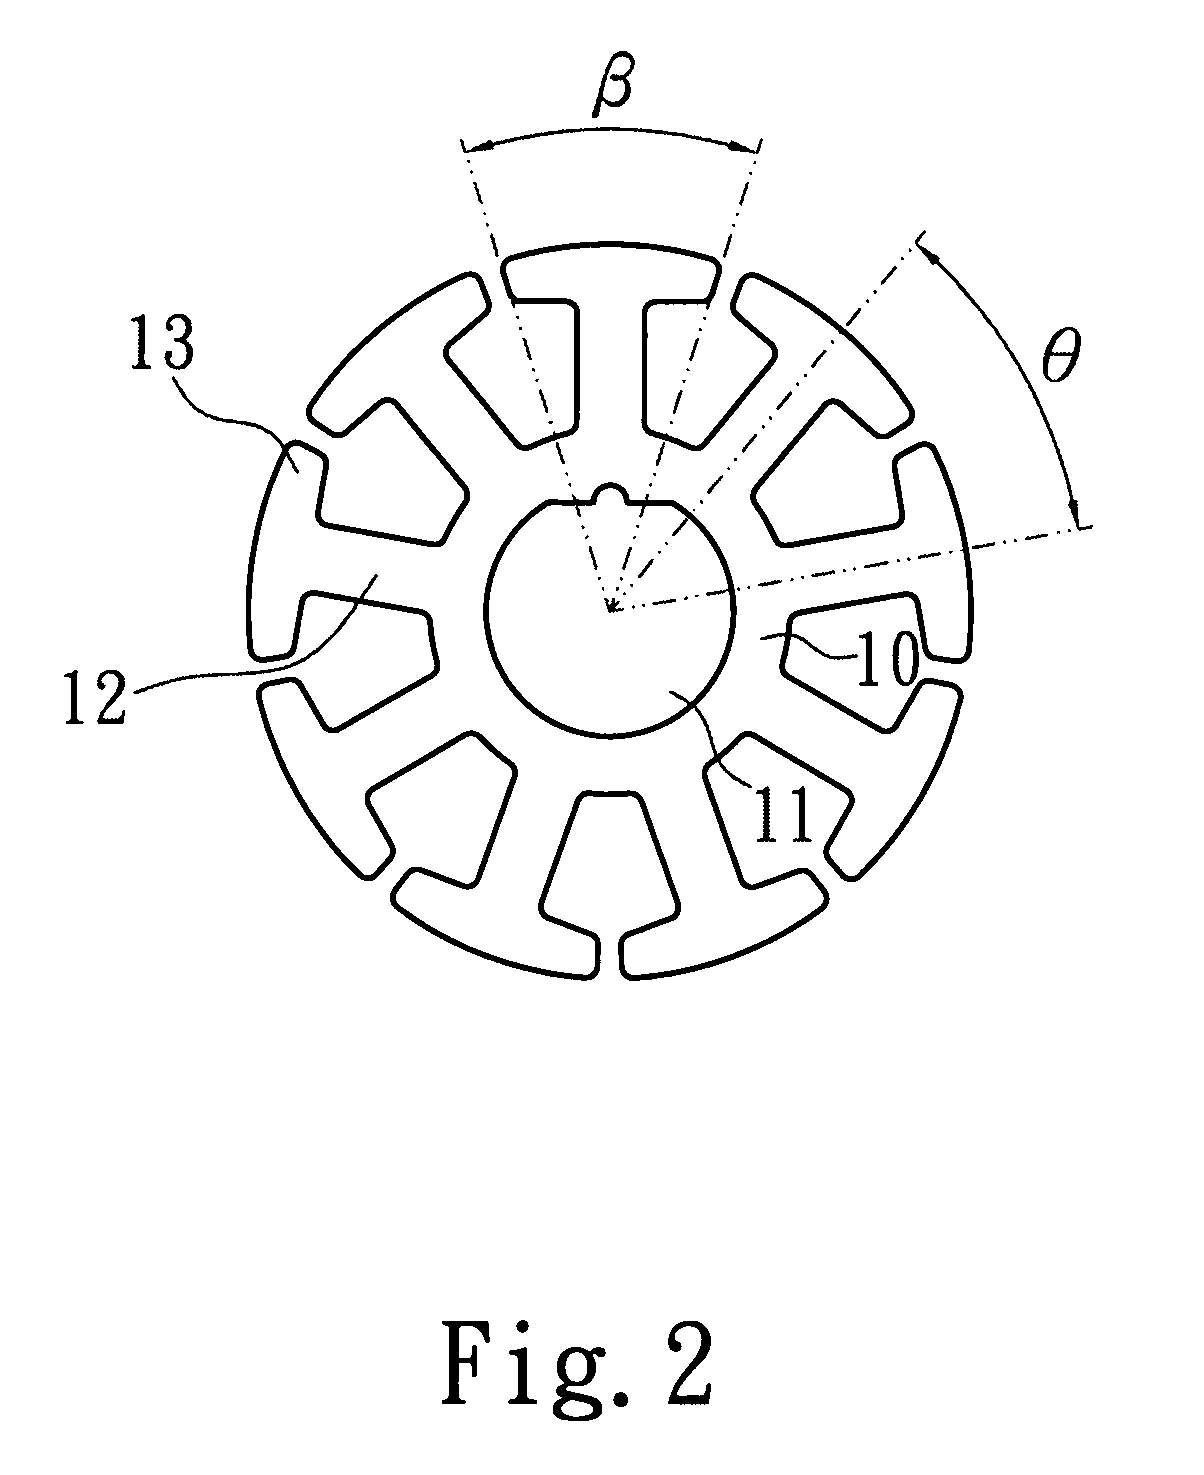 Pole piece structure of stator with radial winding